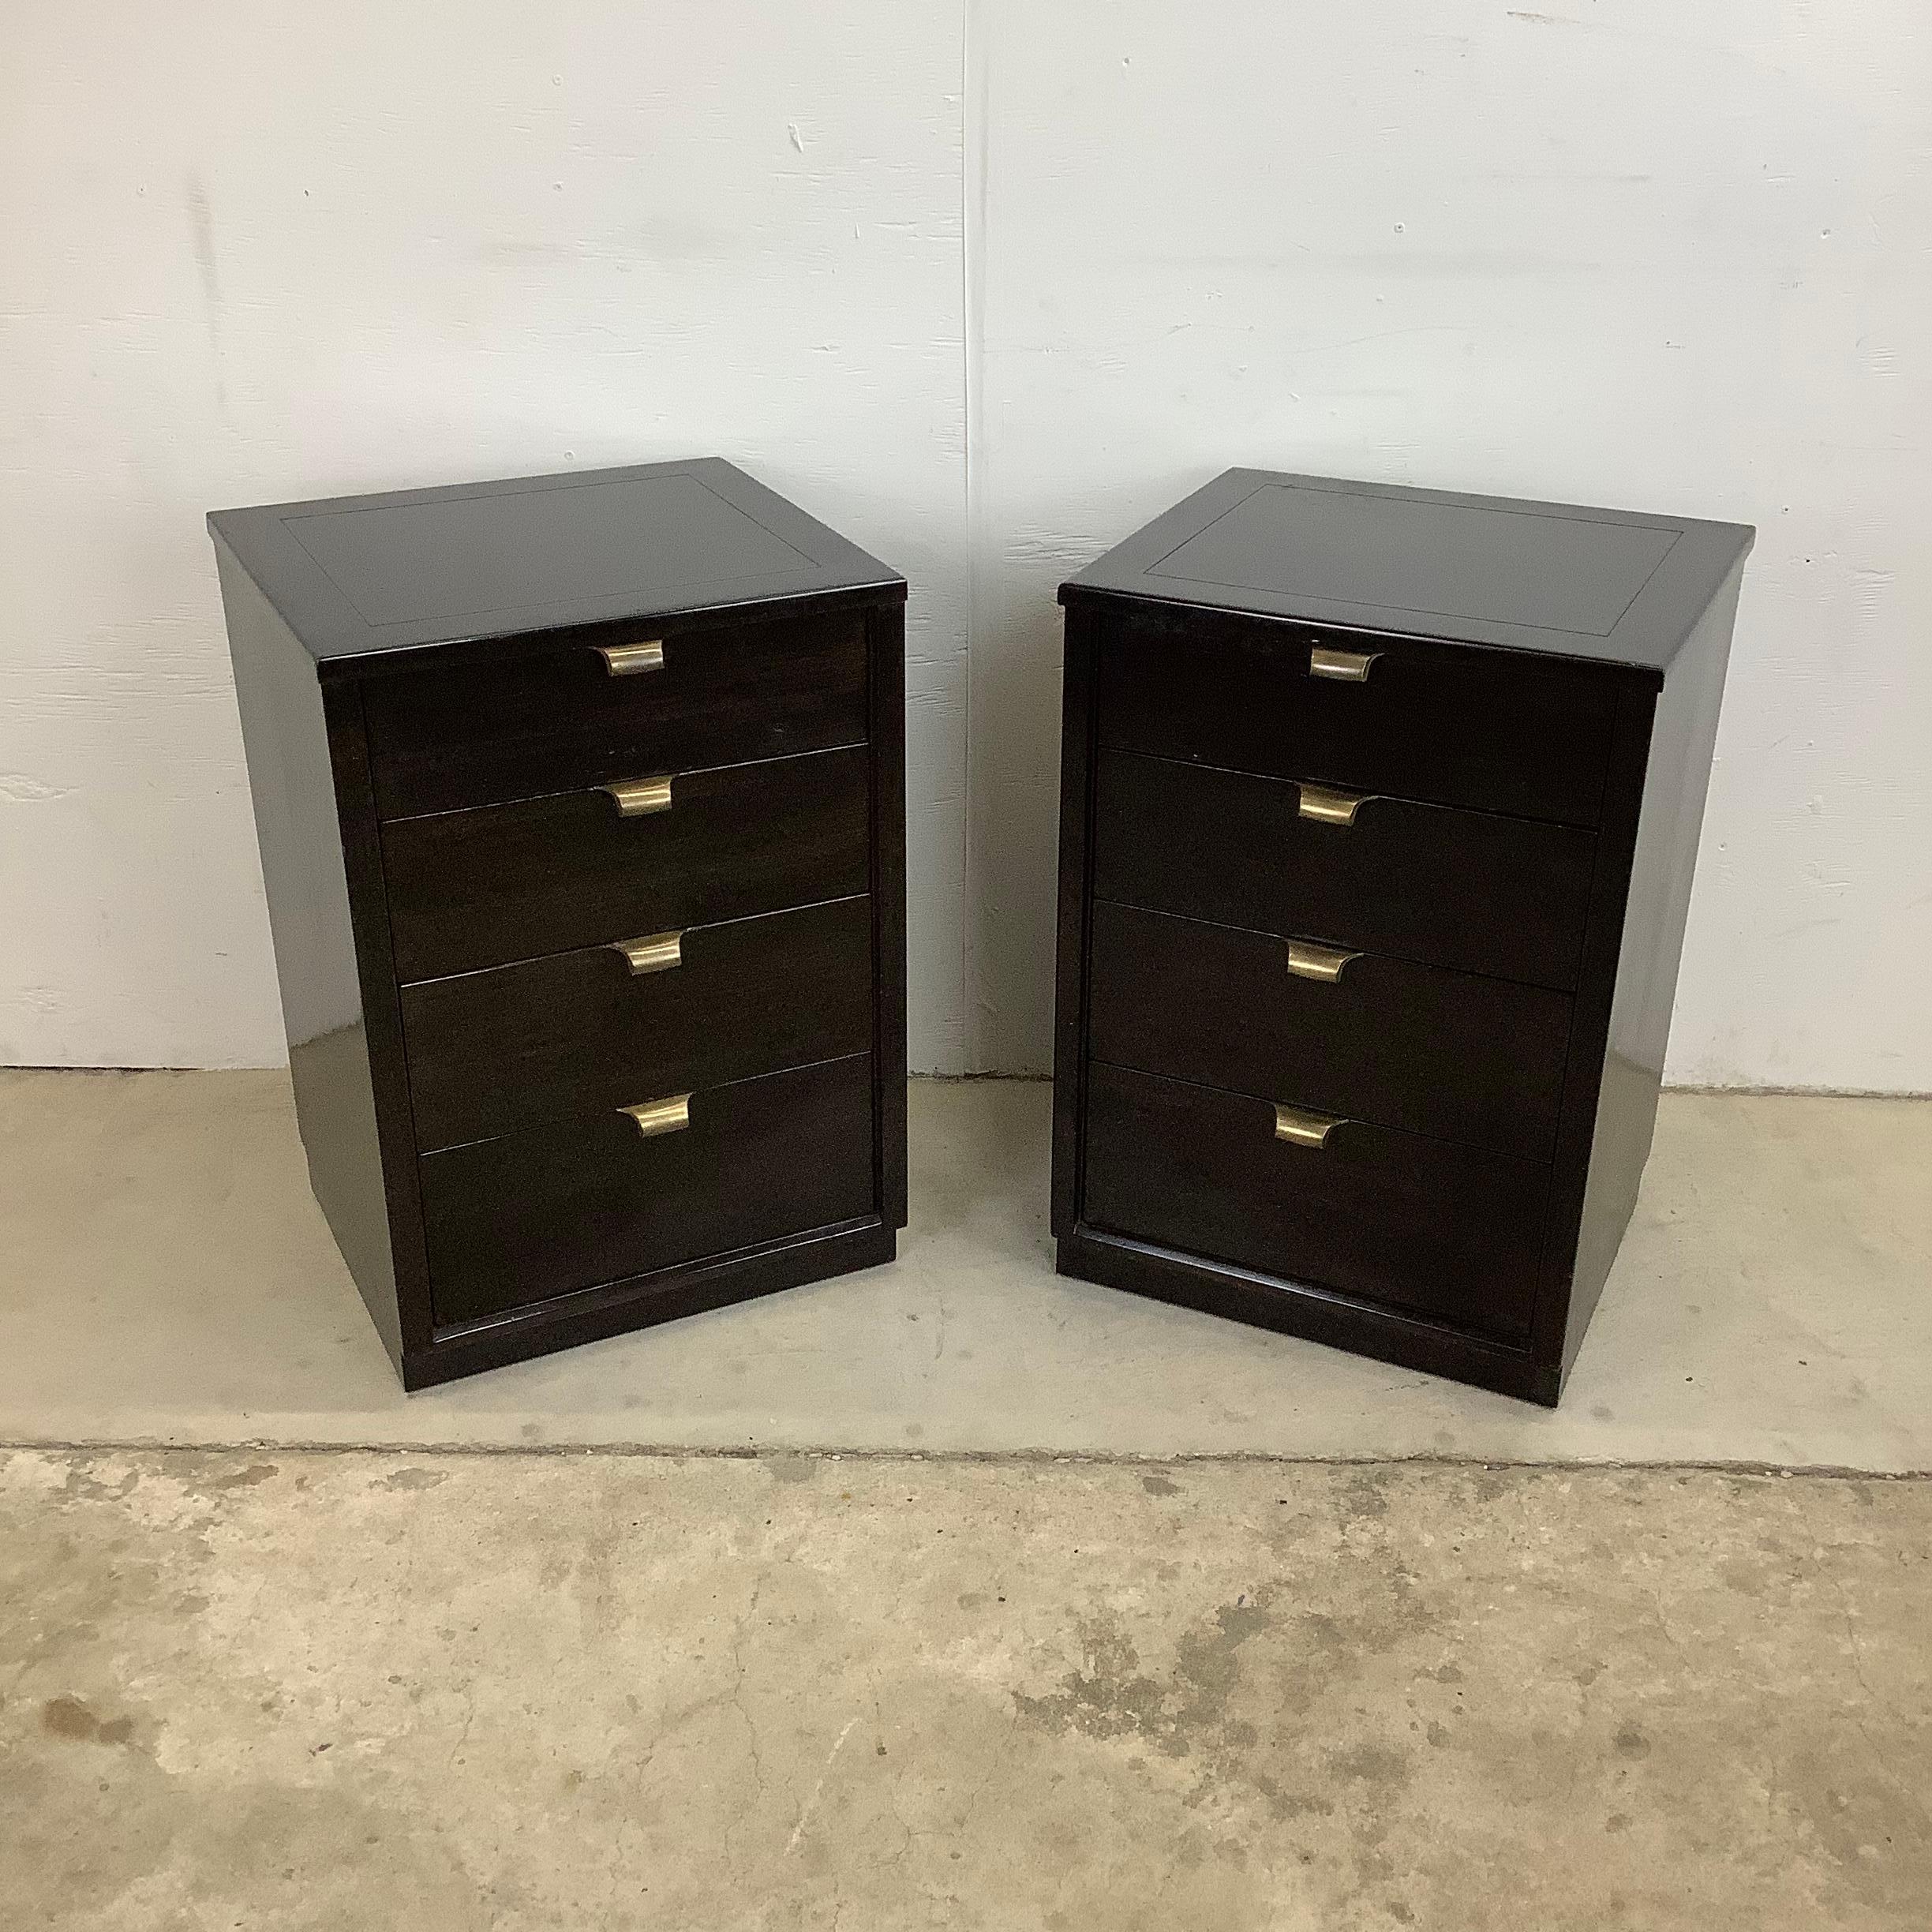 This impressive pair of vintage modern end tables from Drexel Furniture features a black lacquer finish with striking vintage metal drawer pulls. The tall four drawer pair of chests make excellent nightstands with plenty of bedside storage or as an